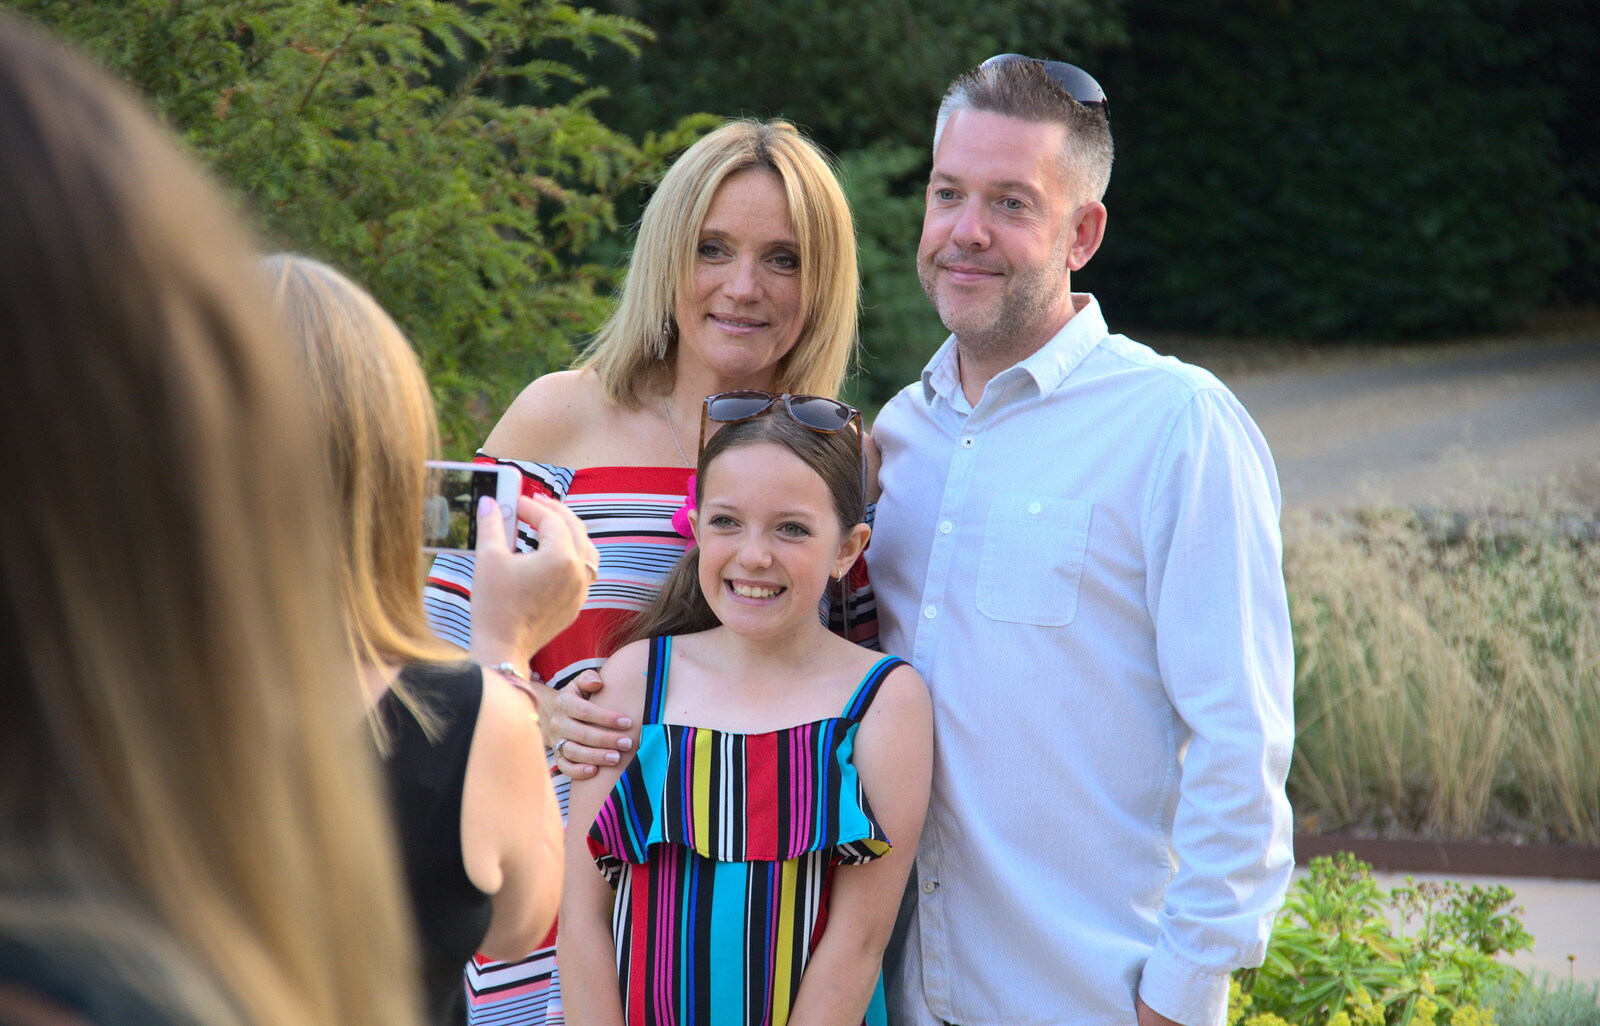 Family snapshot from An Oaksmere Party, Brome, Suffolk - 14th July 2018